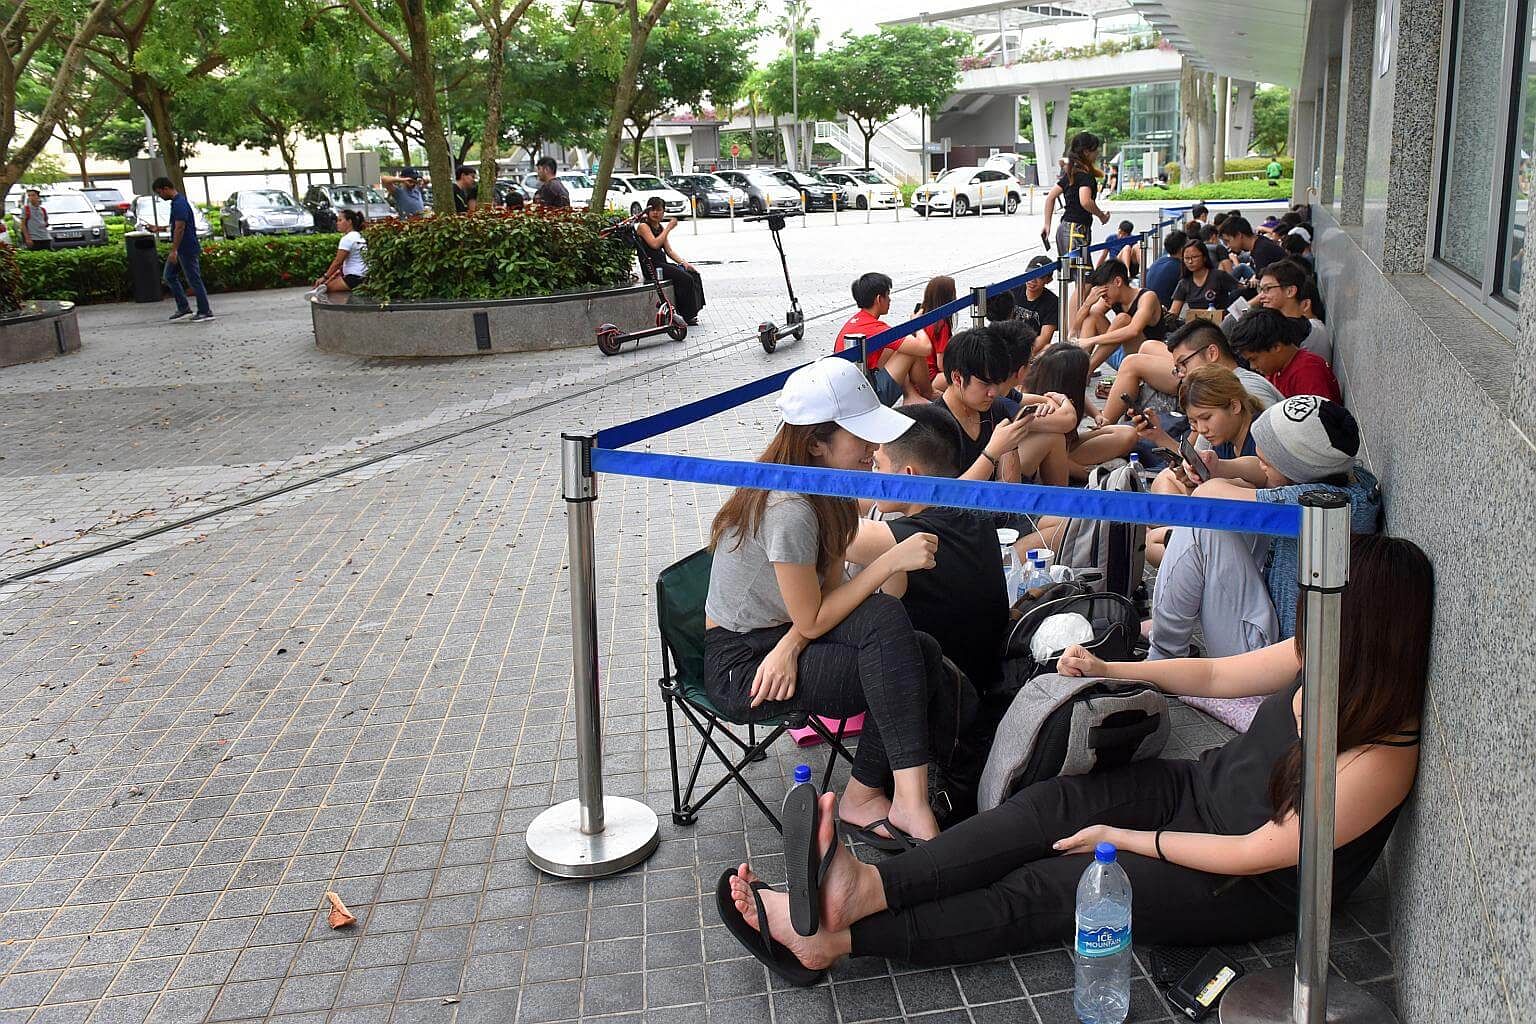 Hundreds queued up overnight 2 days before Supreme x Louis